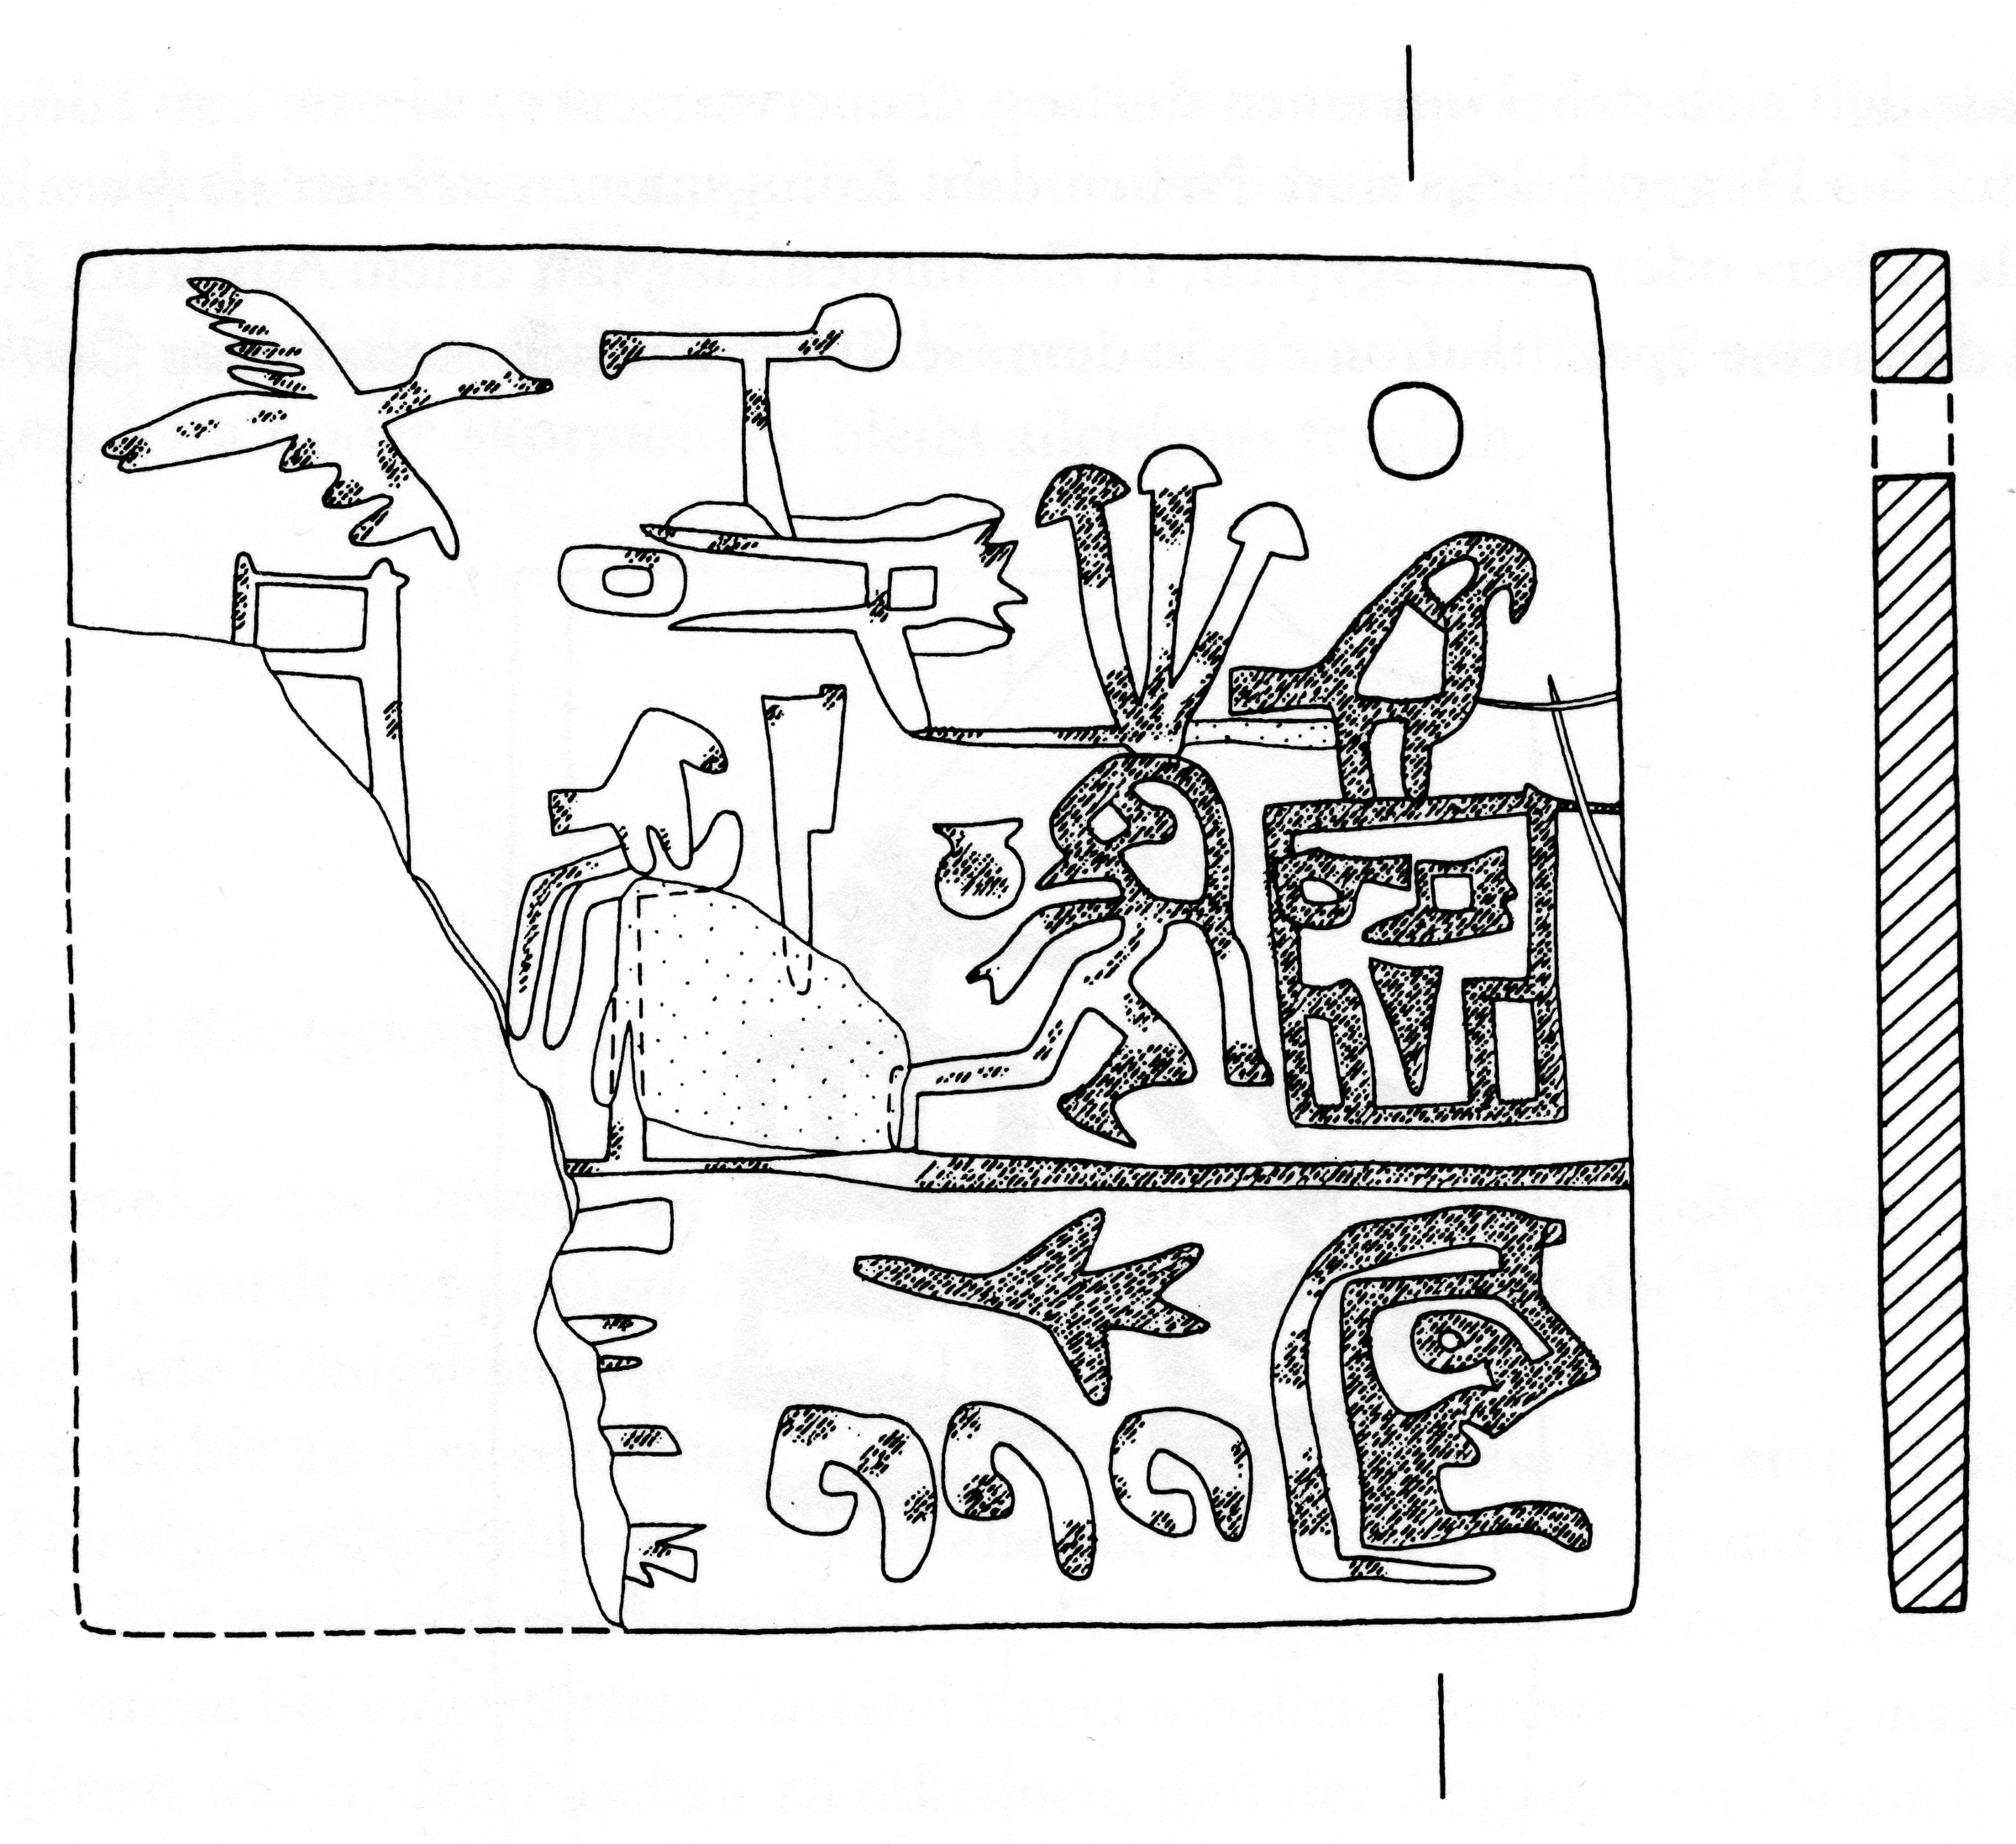 The Narmer year label